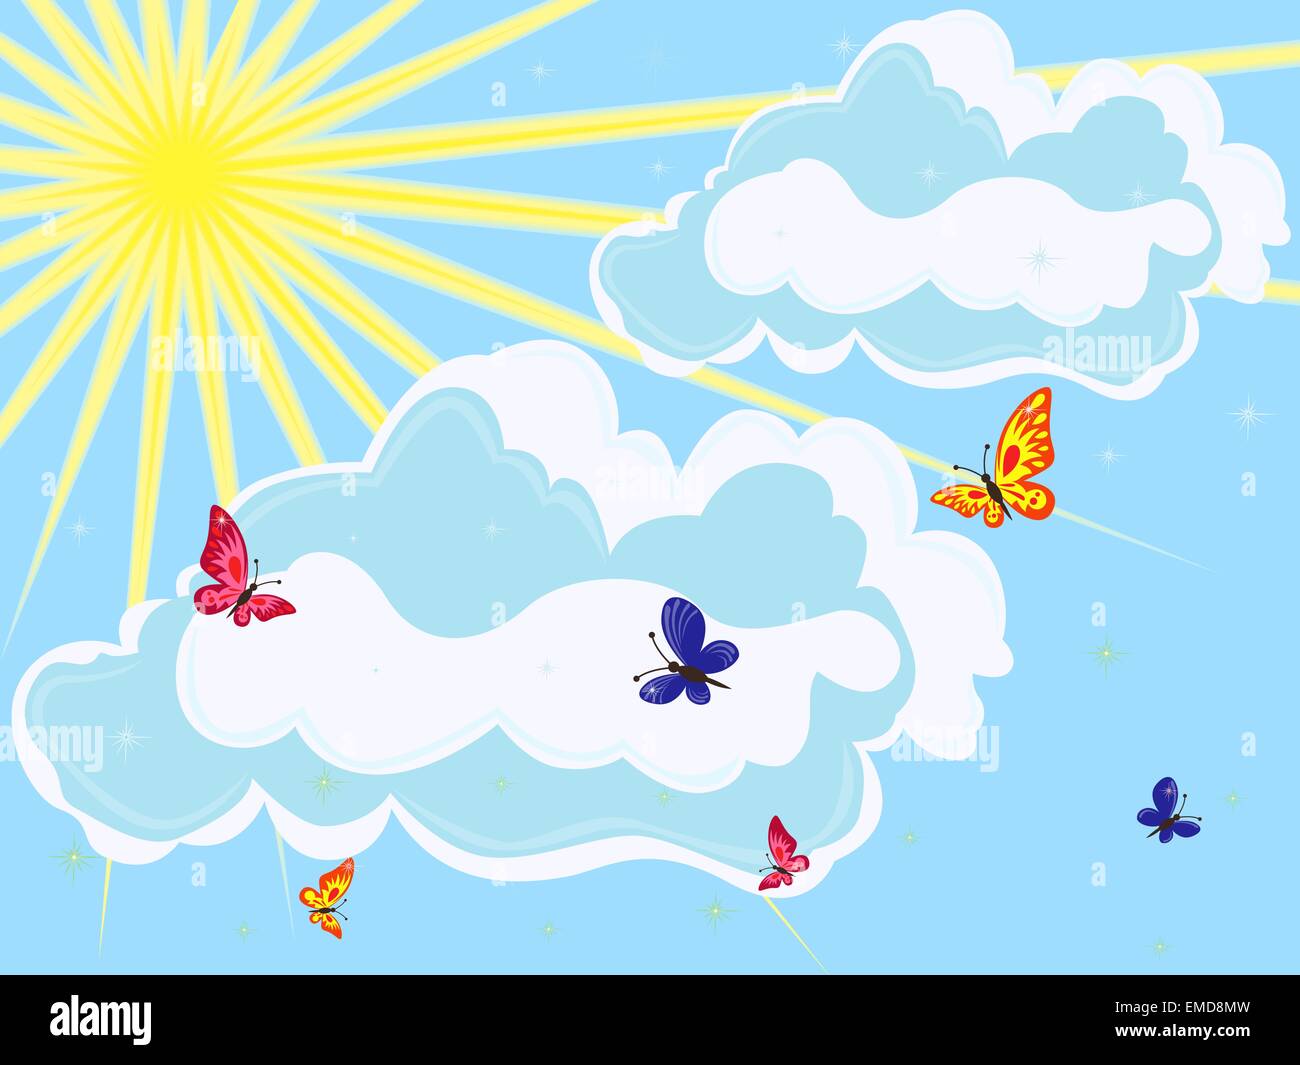 Sky with sun, clouds and butterflies Stock Vector